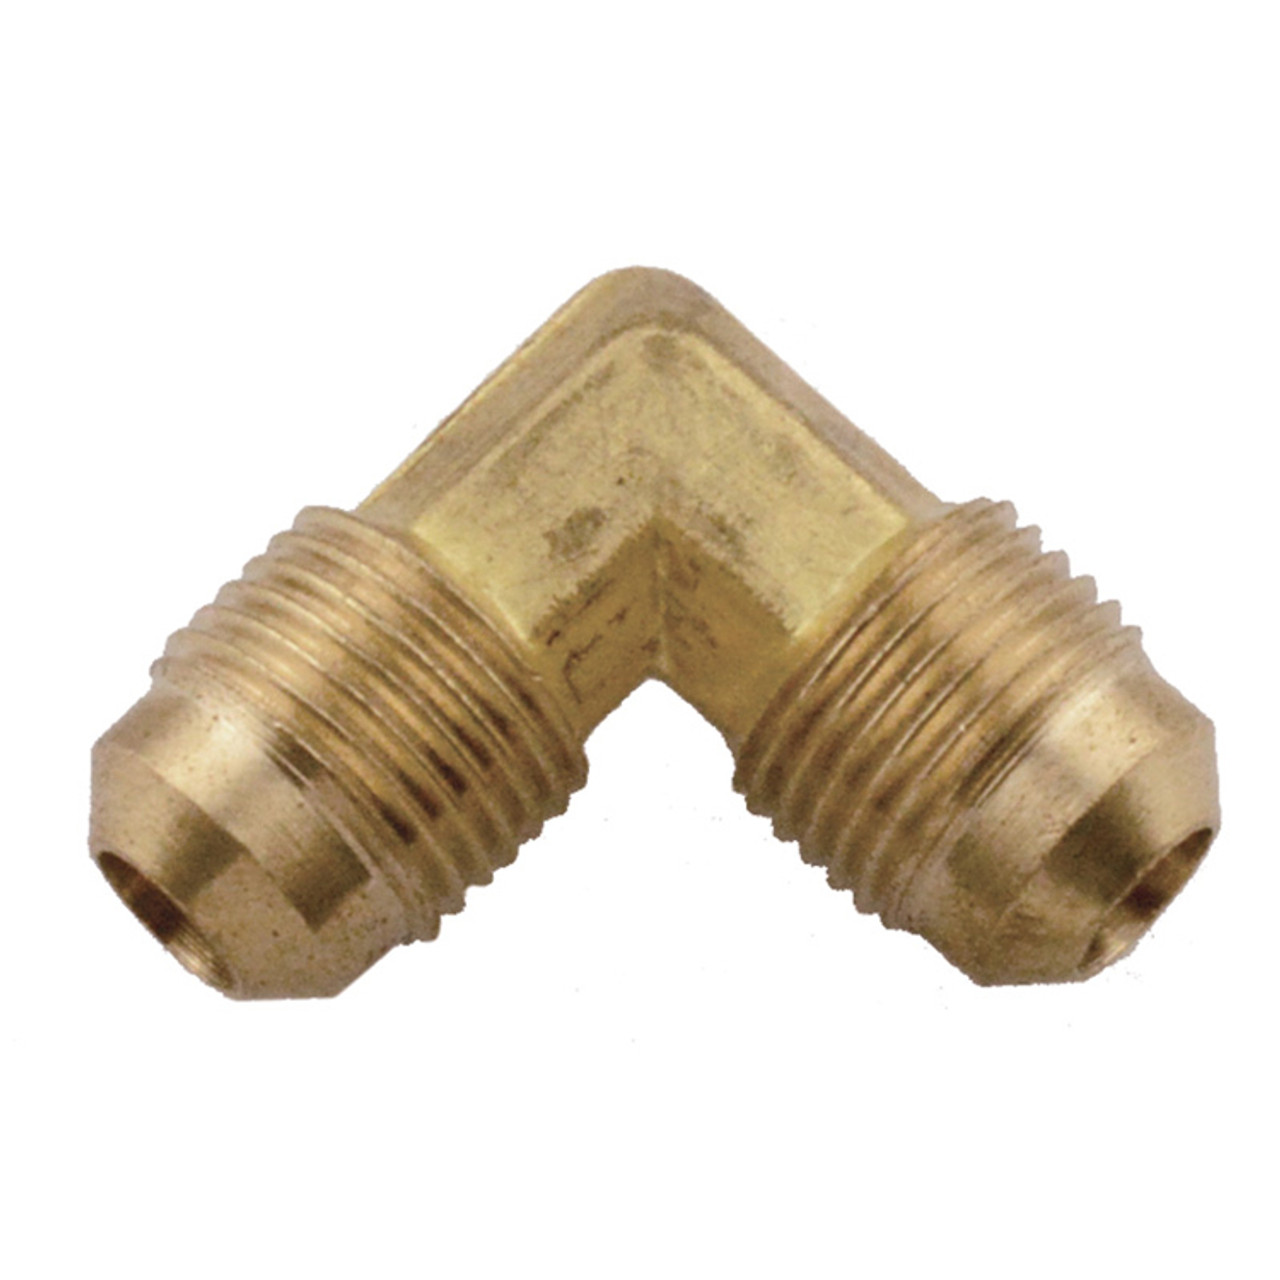 3/4 x 3/4" Brass Male 45° SAE Flare 90° Elbow   G1494-12-12